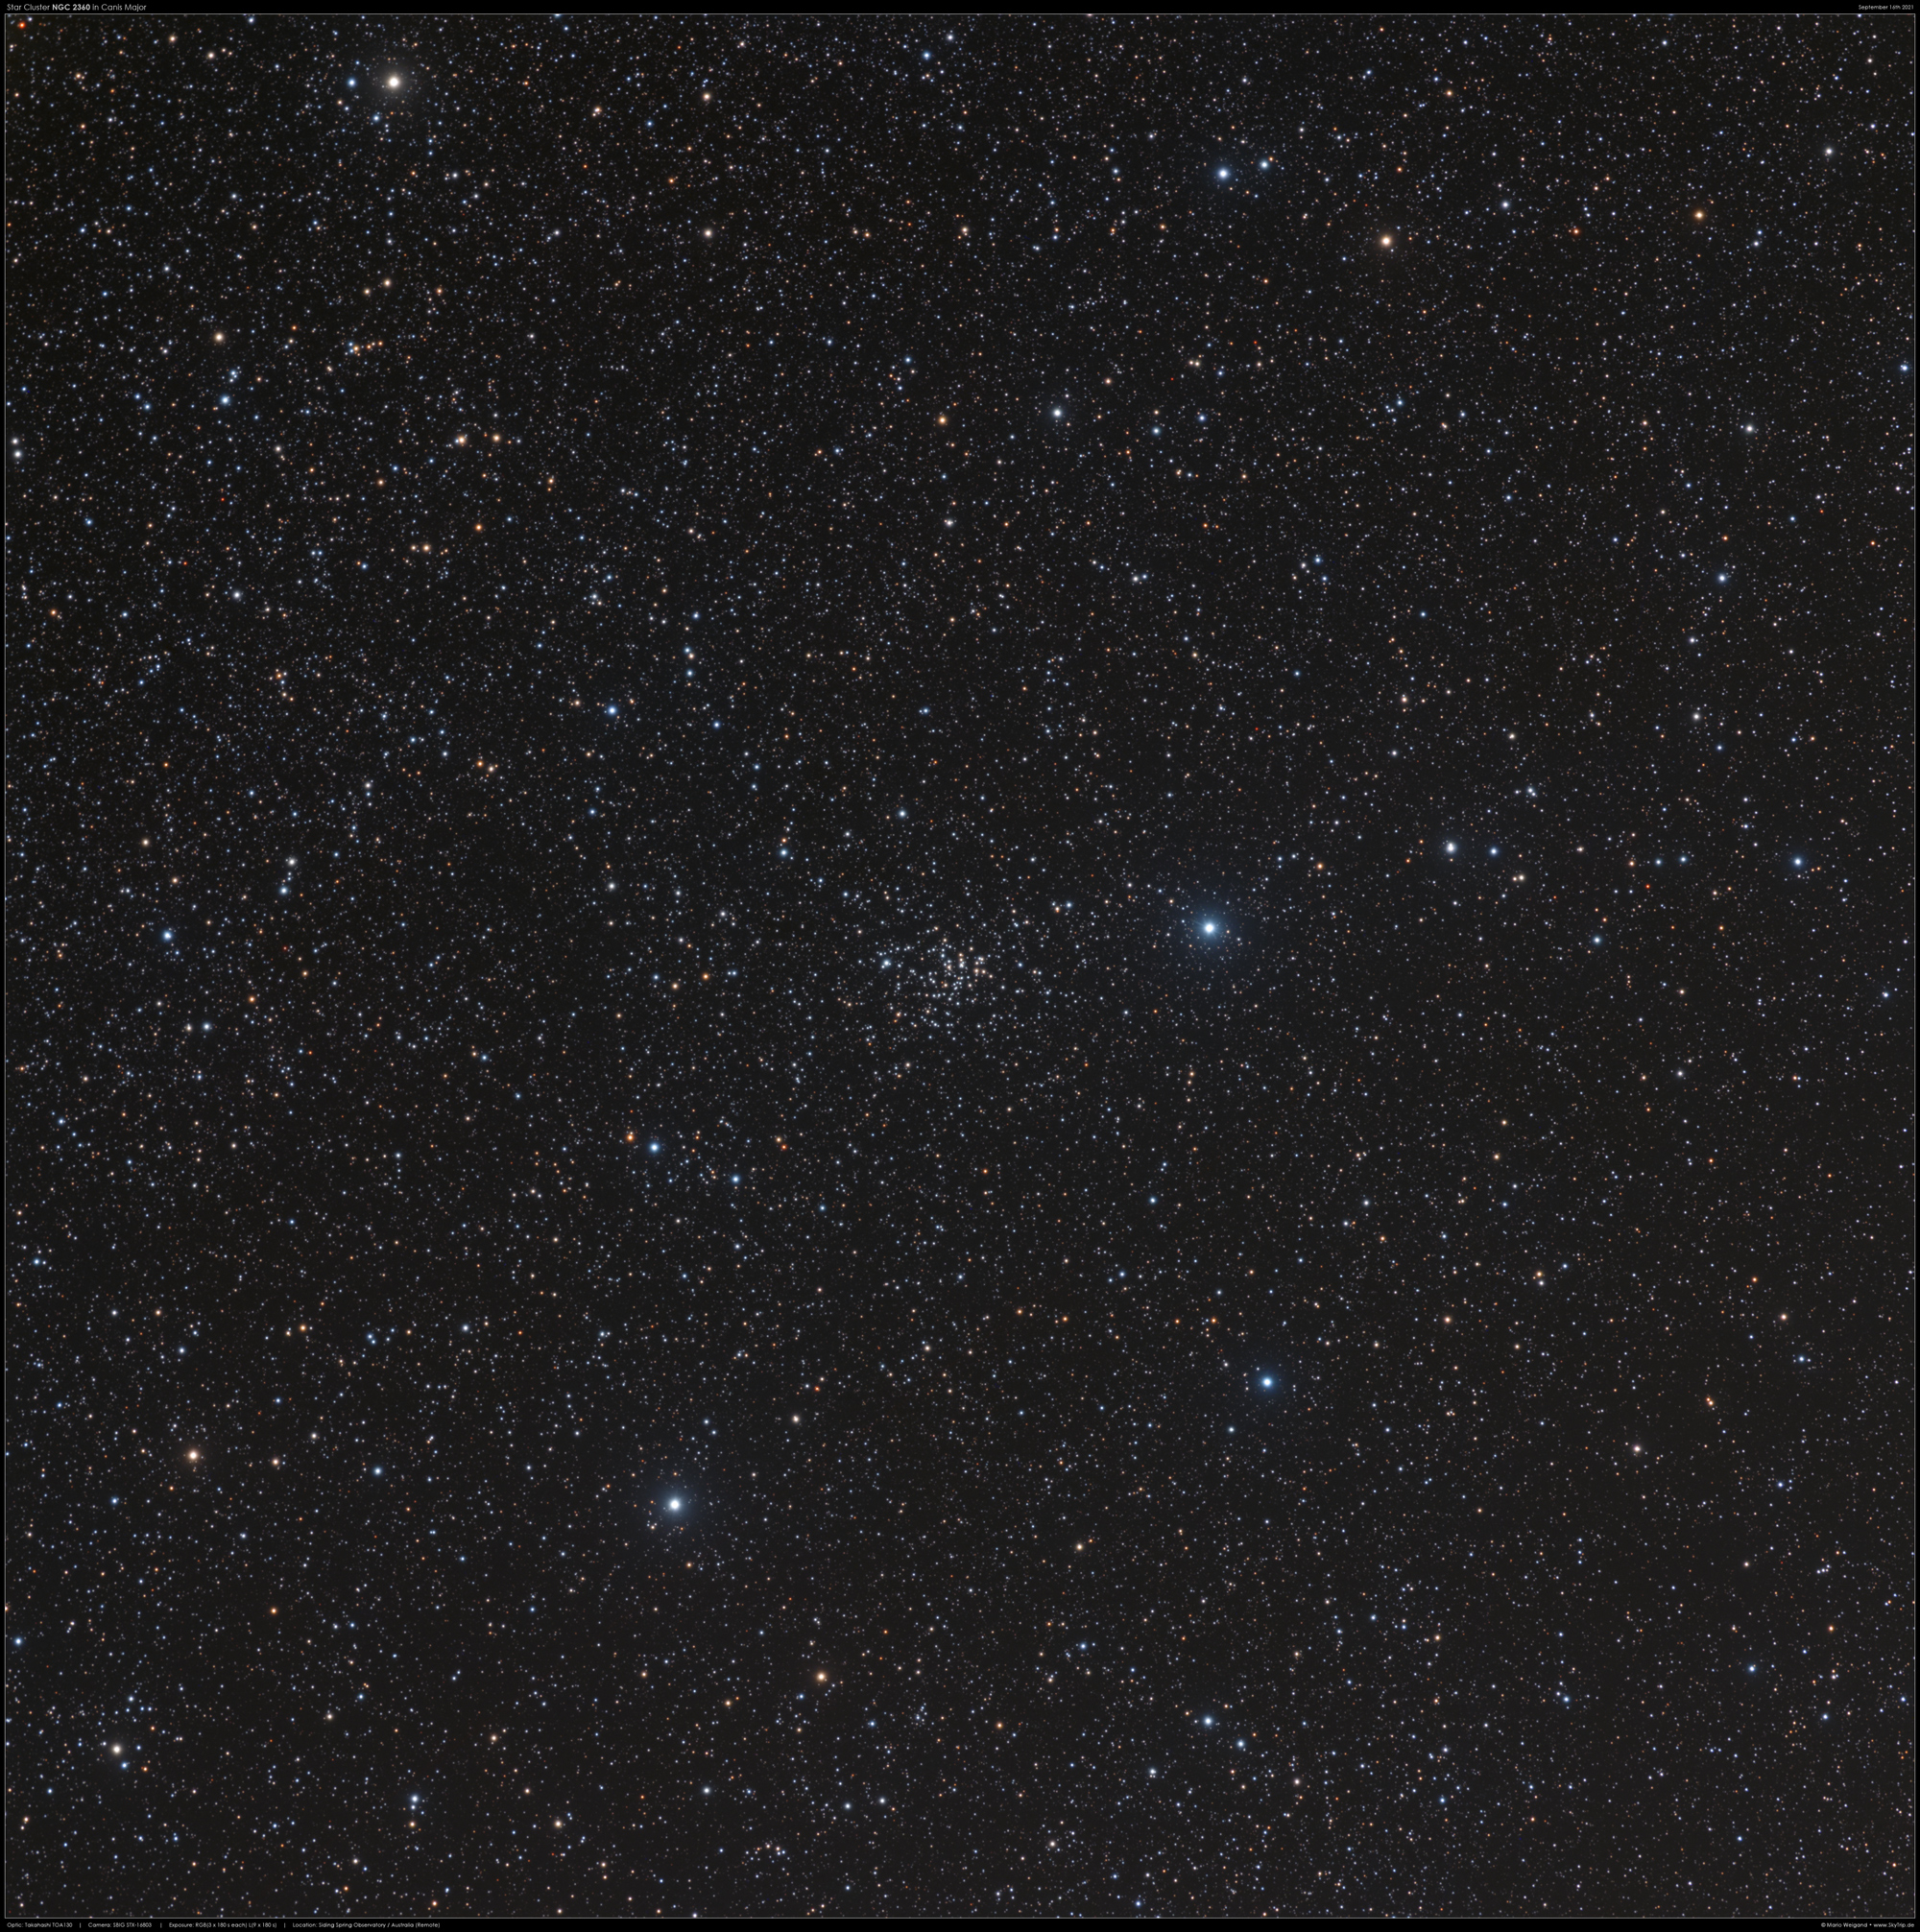 NGC 2360 in Canis Major